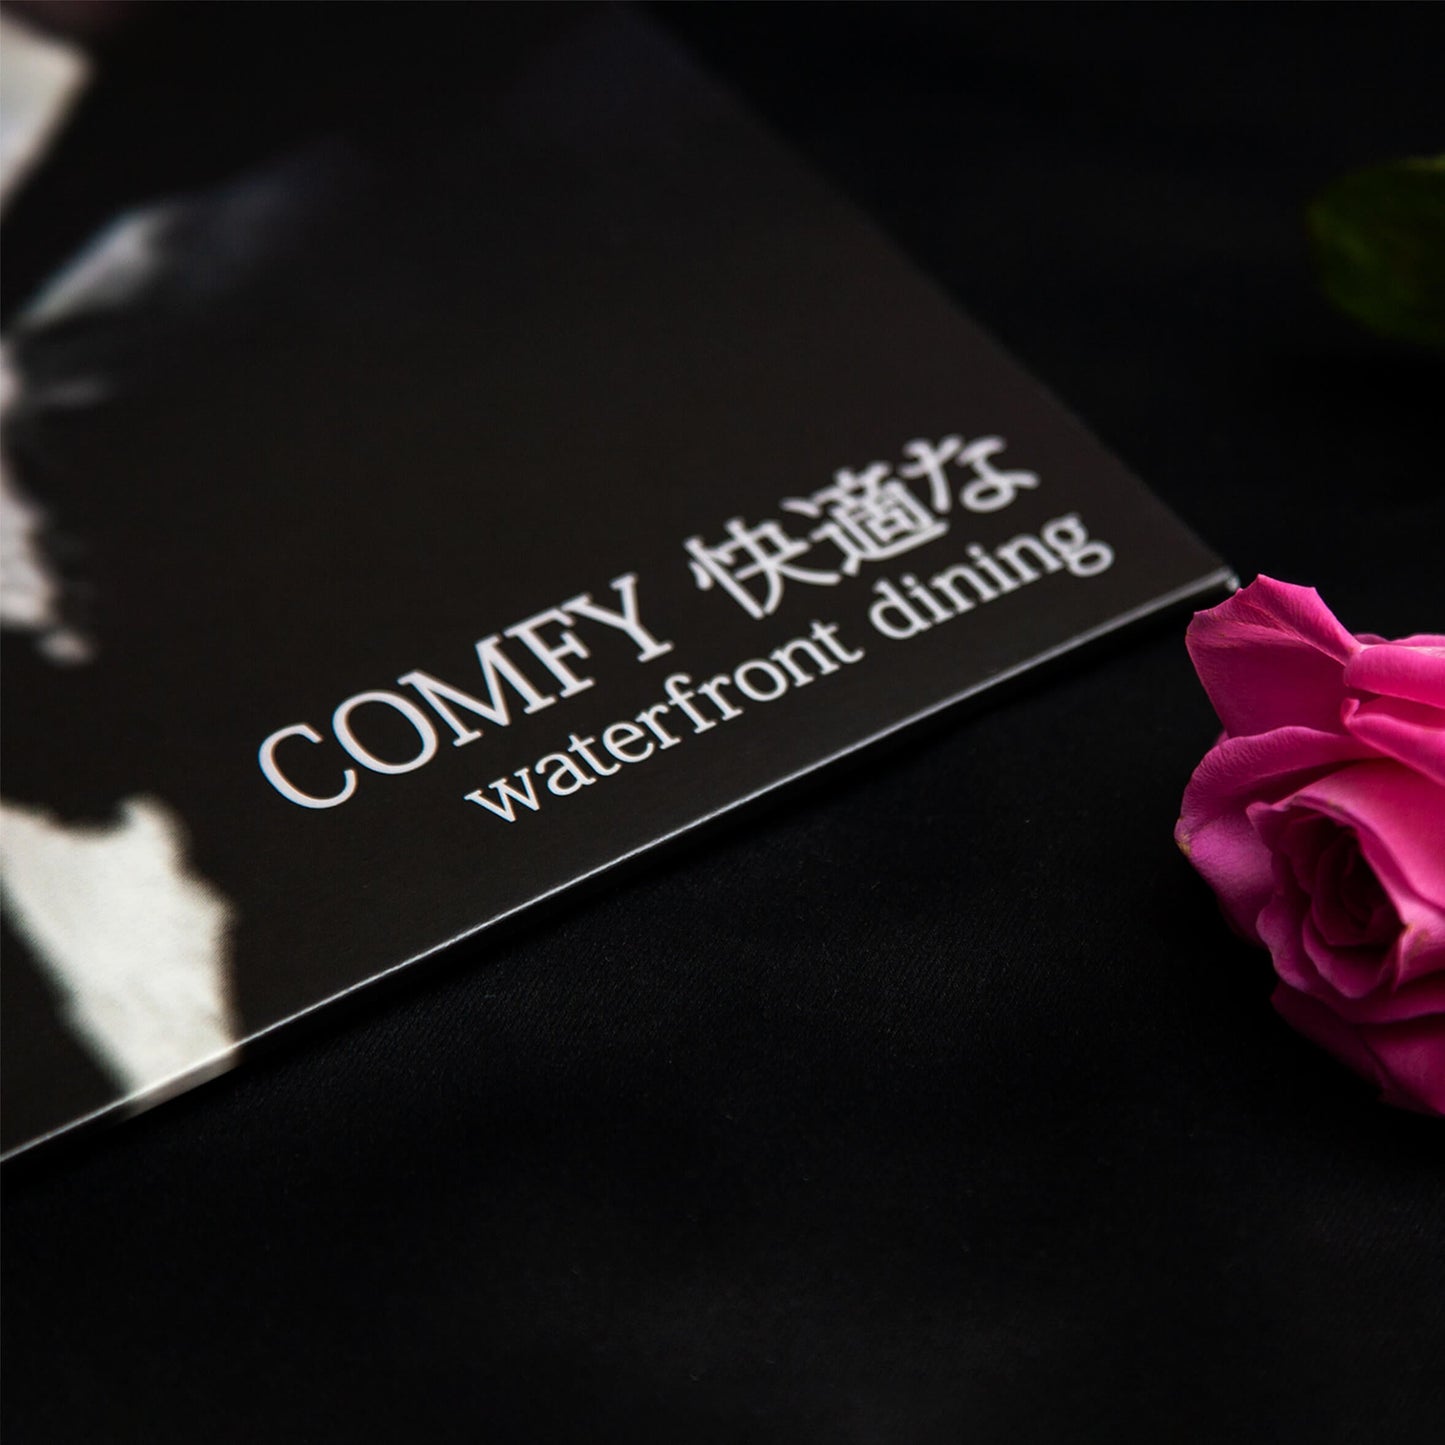 waterfront dining - COMFY 快適な vinyl